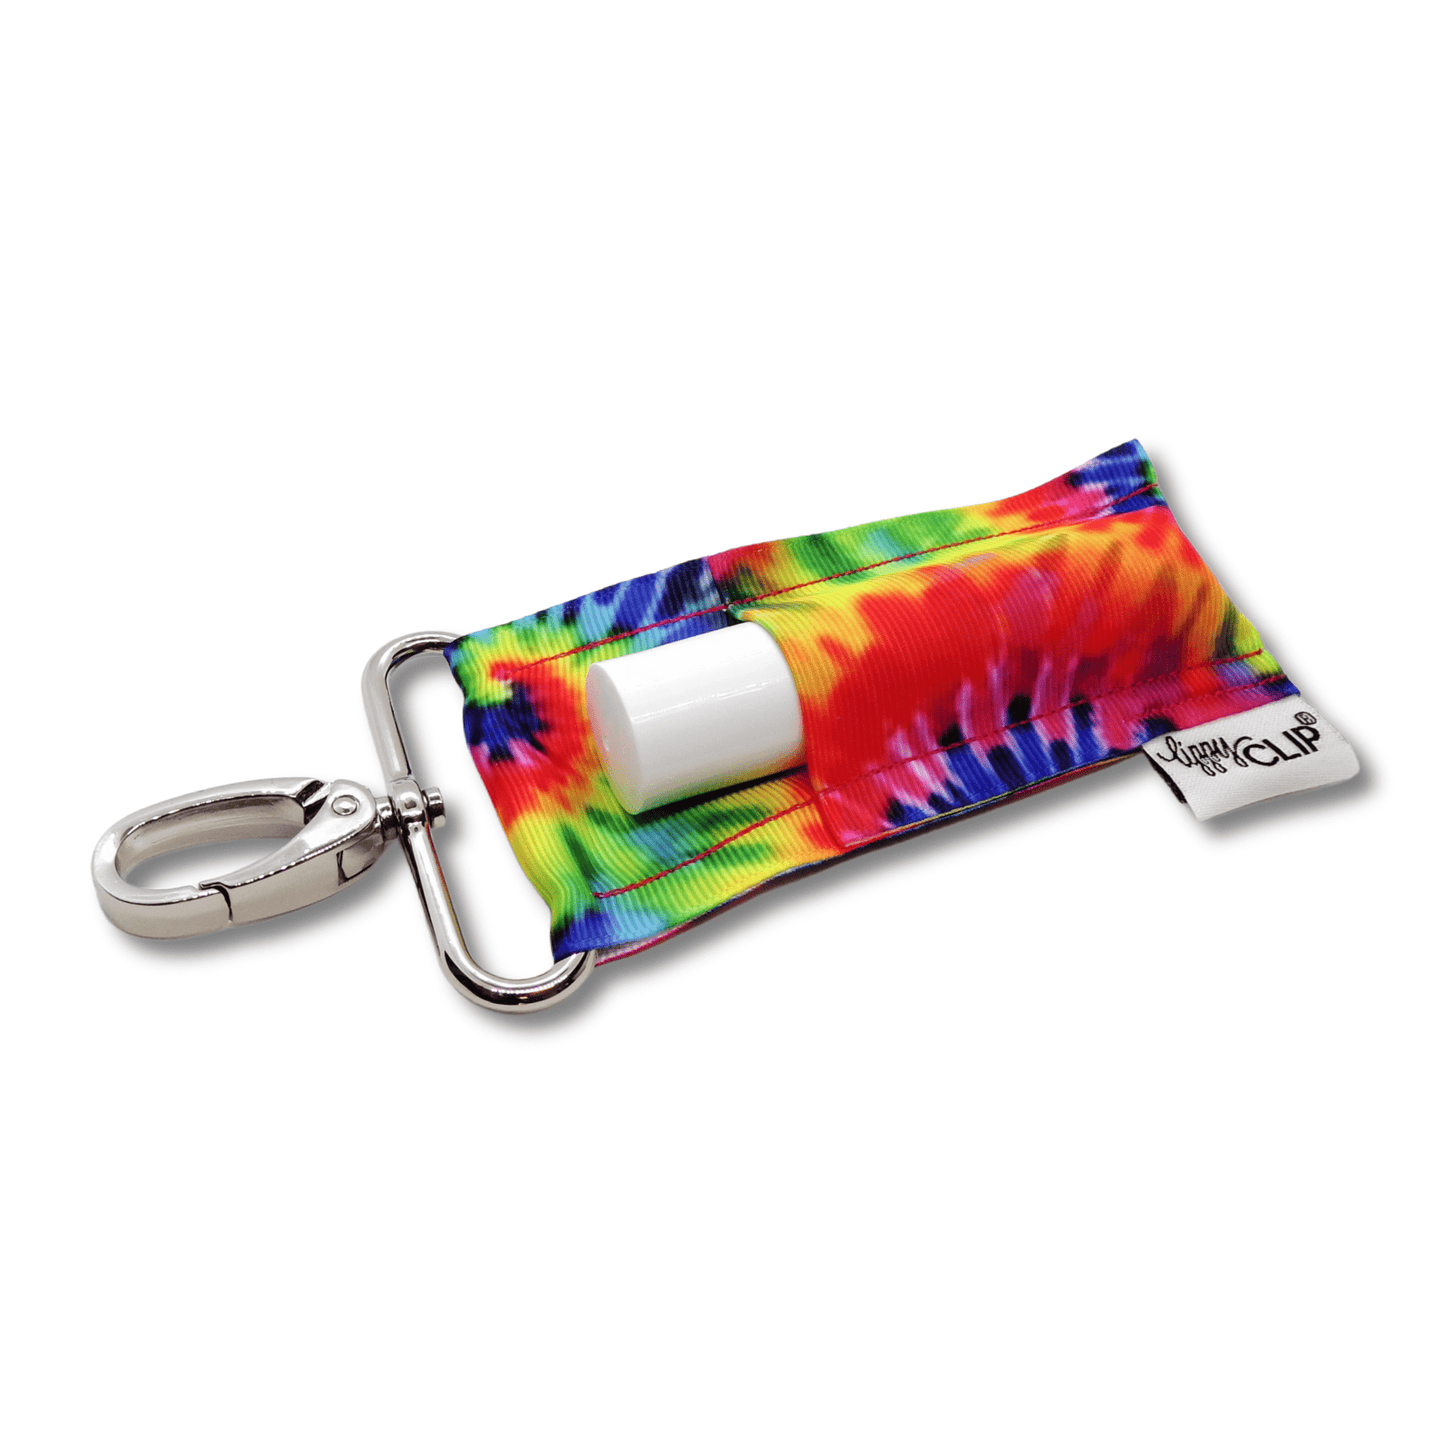 Tie Dye LippyClipKISS for larger lip balms, essential oils: Standard Size (most common)